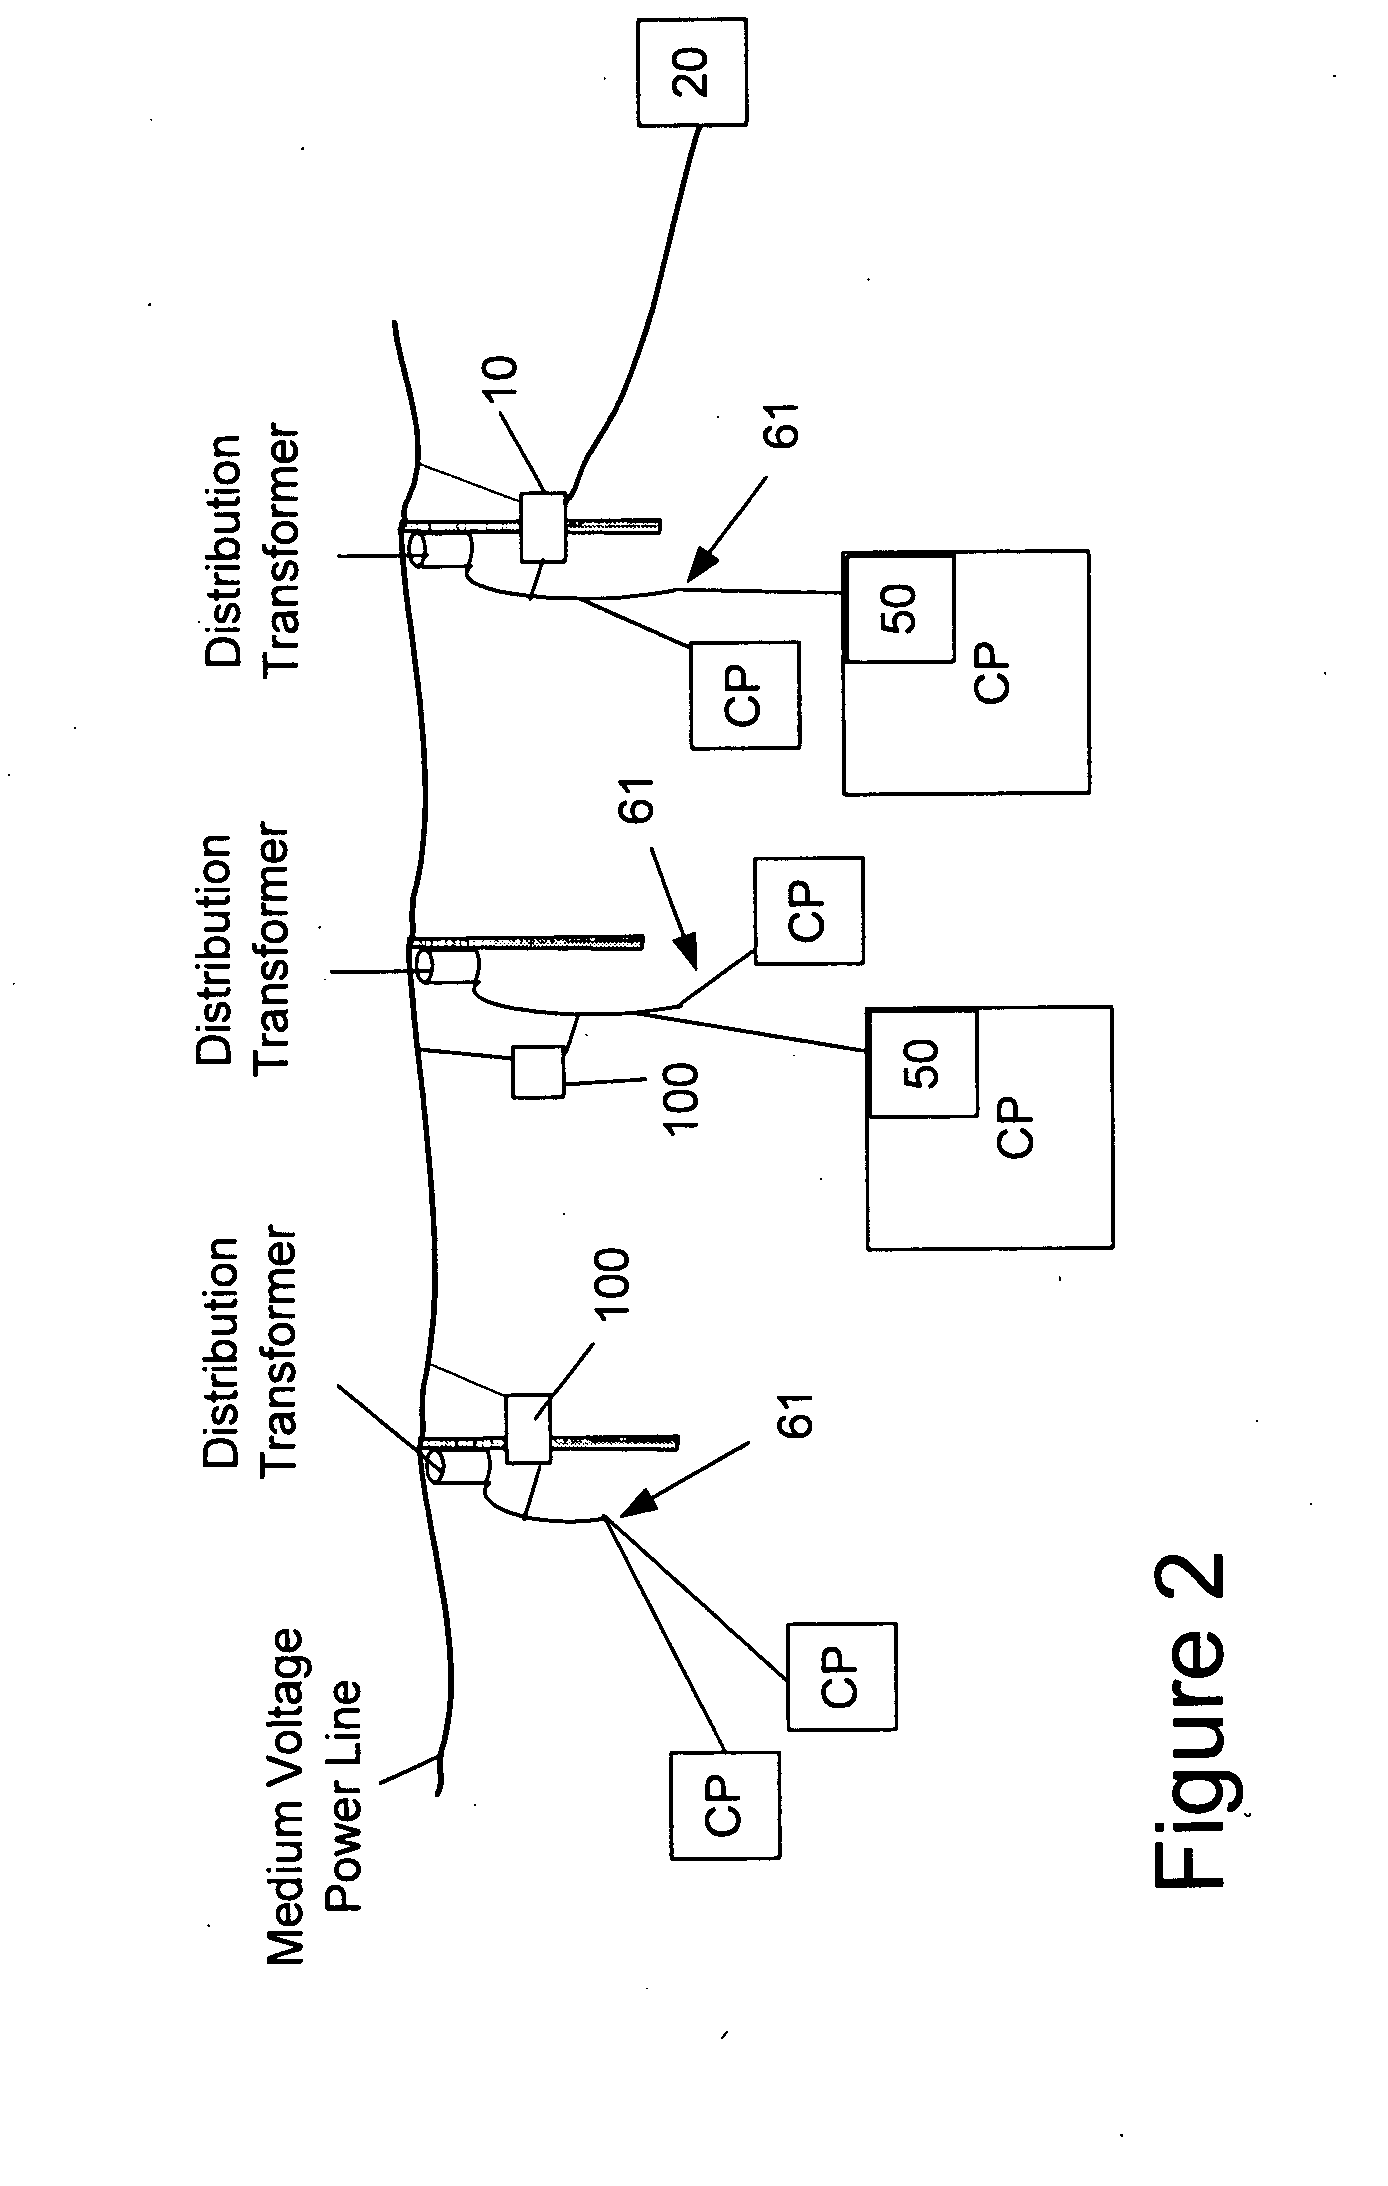 System, Device and Method for Providing Power Line Communications